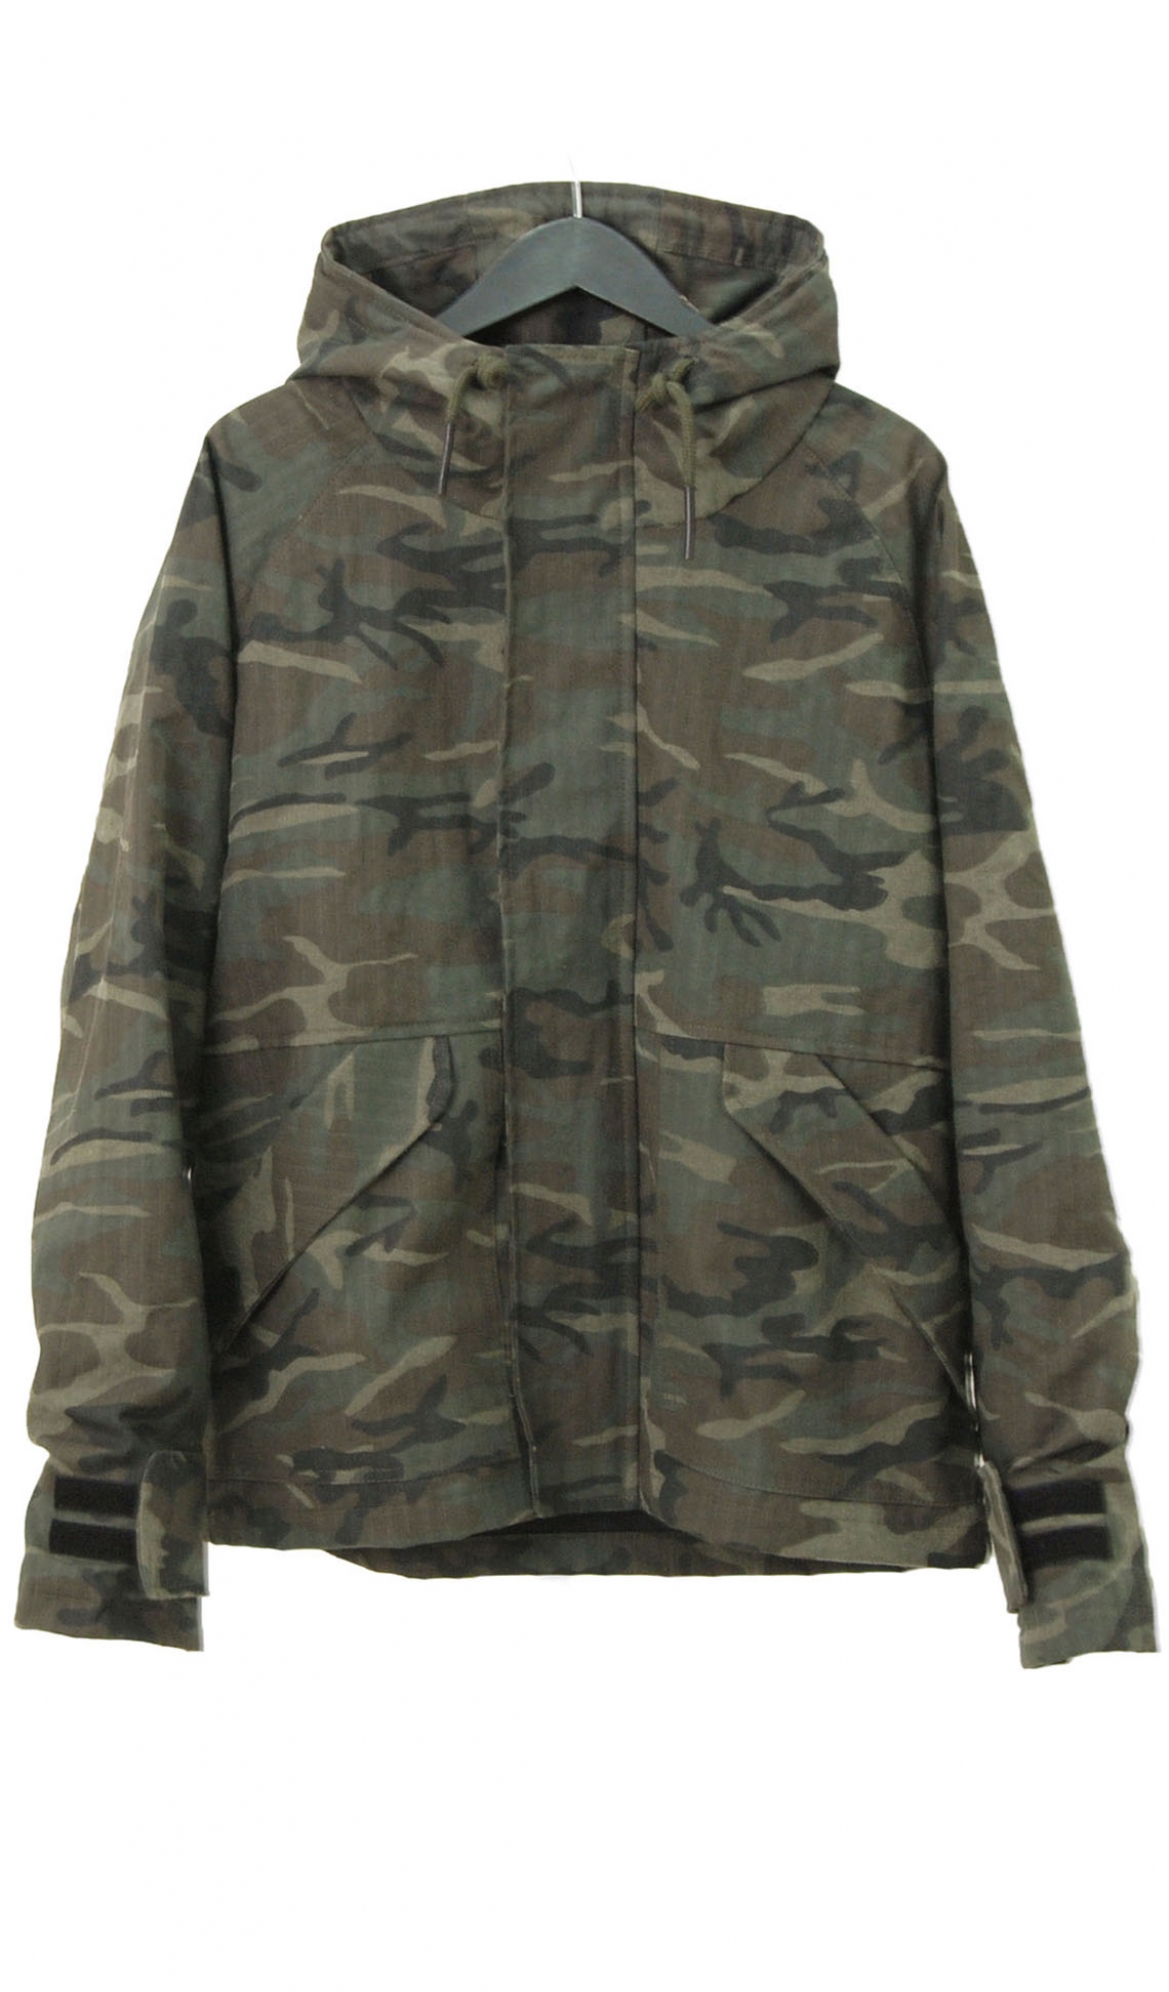  CAMO HOODIE JACKET (SOLD OUT)